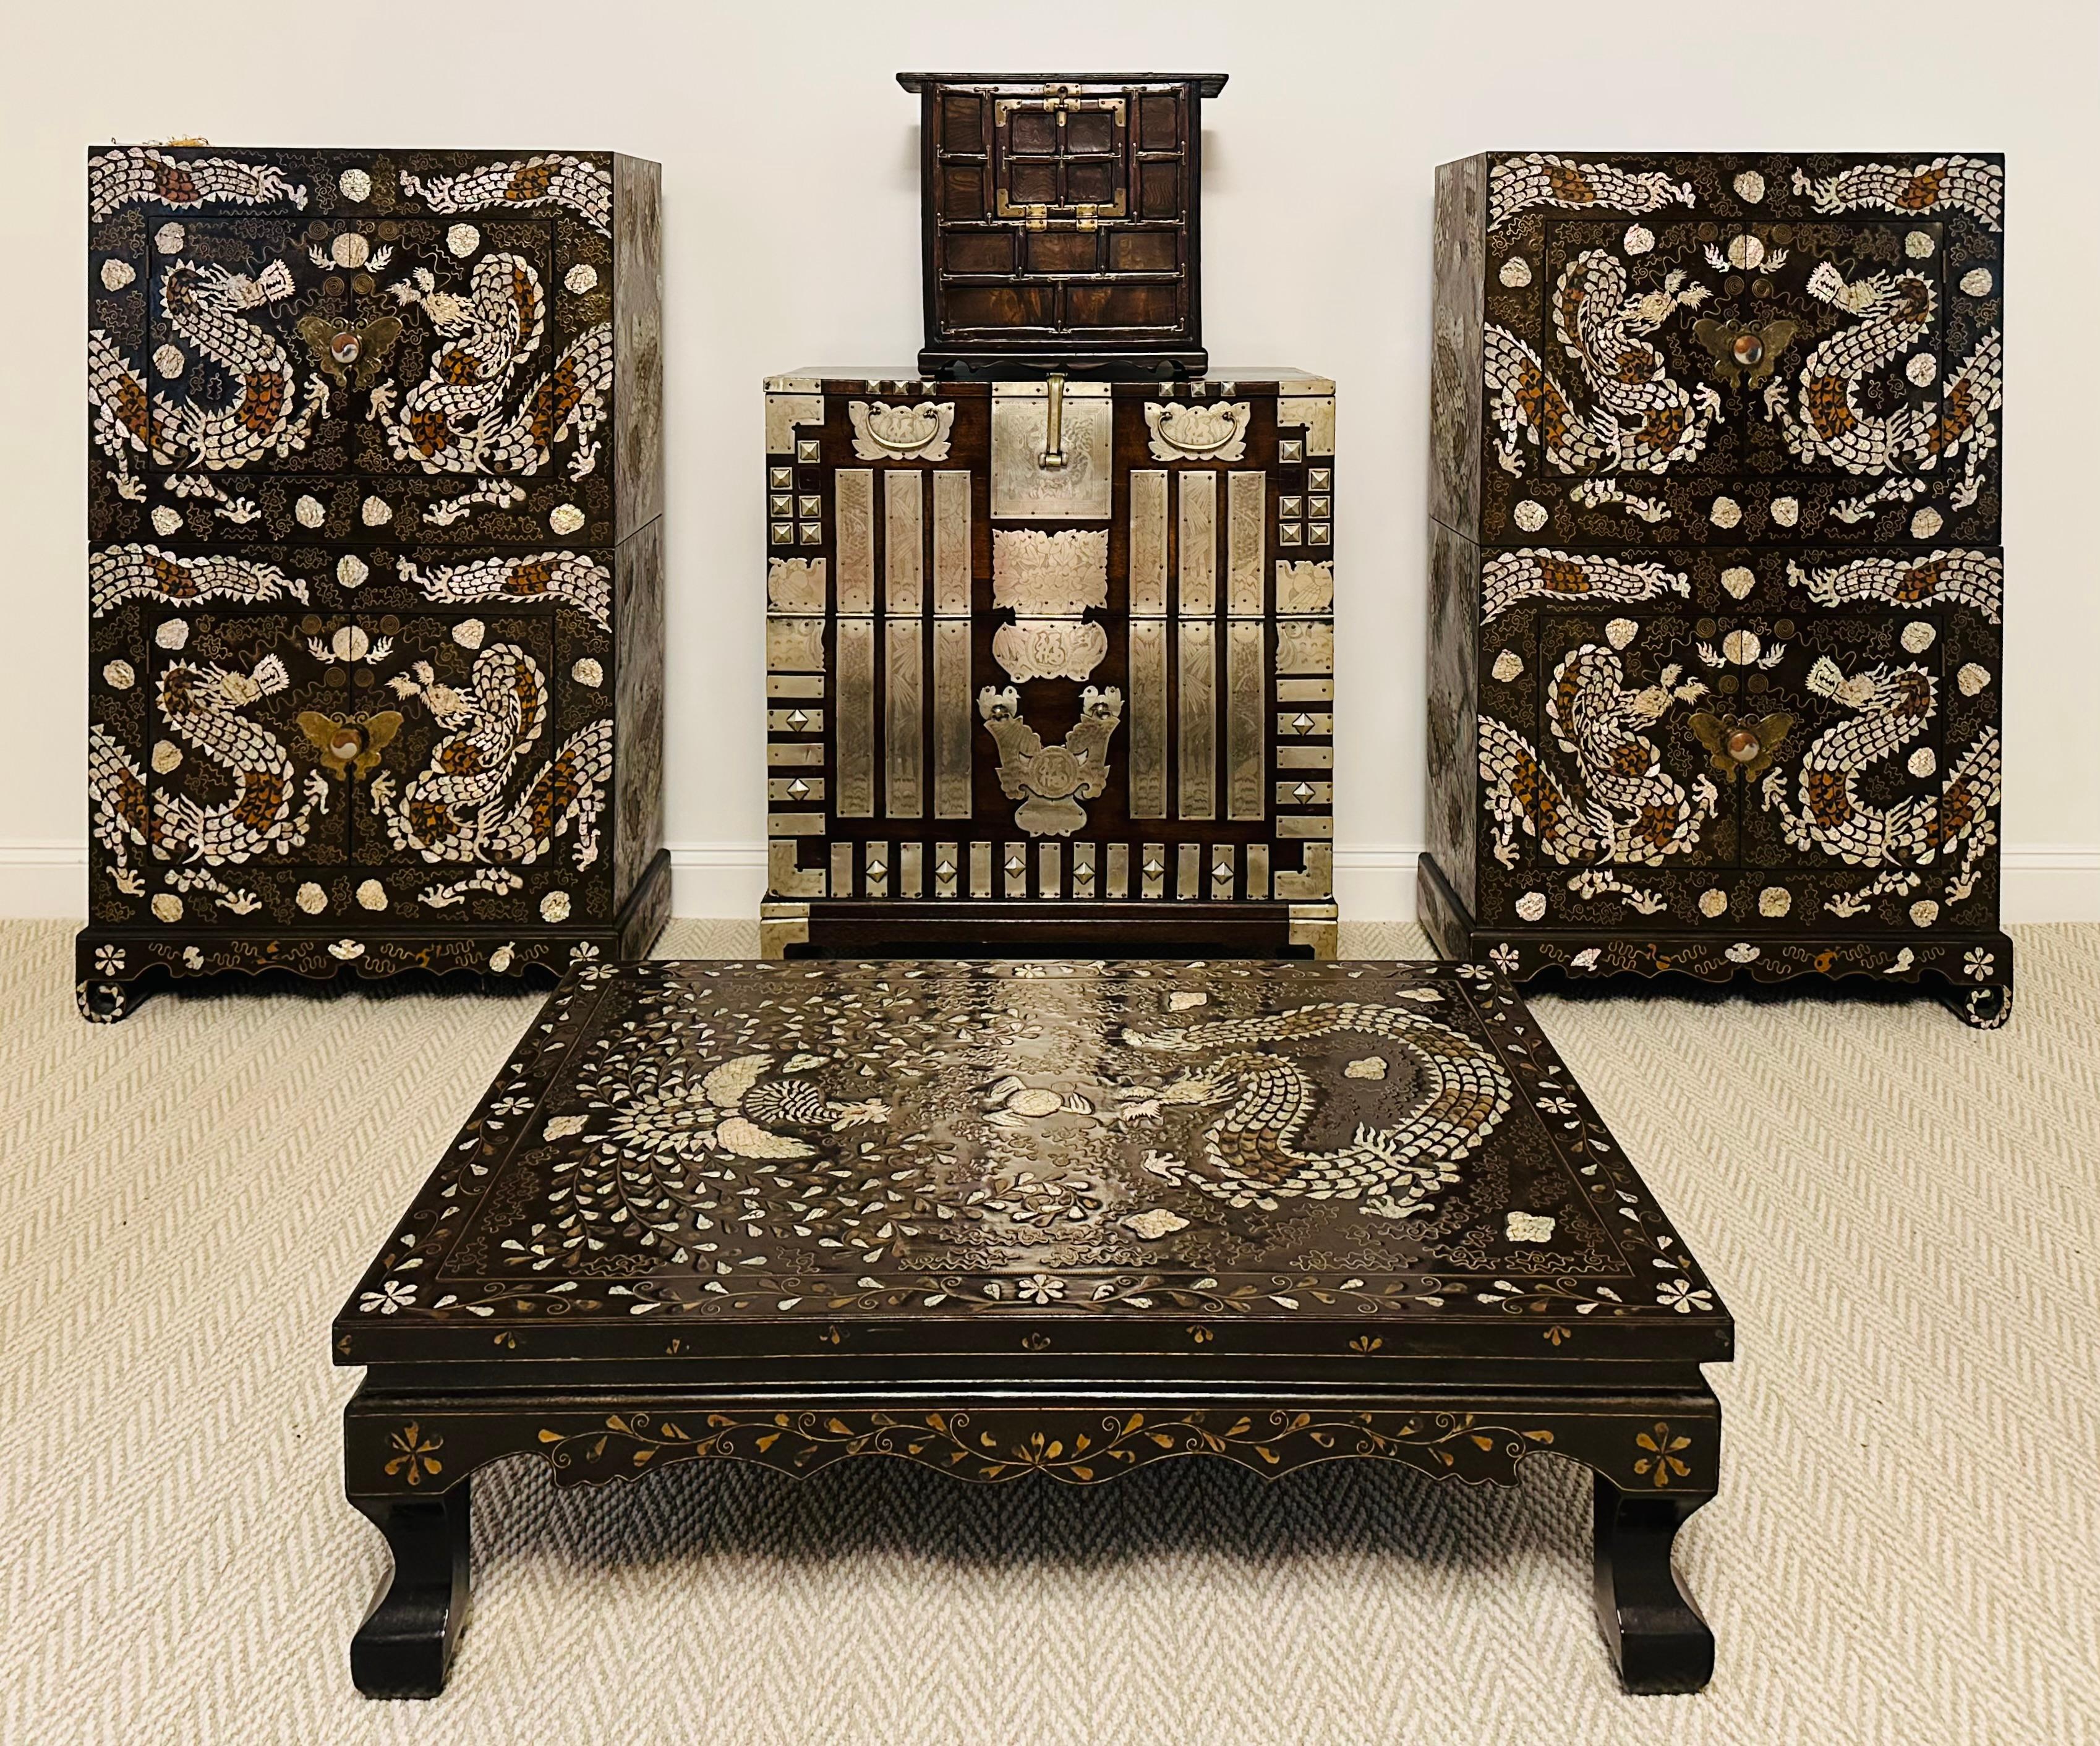 A Korean black lacquered wood low table with elaborate inlay works circa late Joseon dynasty (late 19th century to turn of 20th century). The low table, supported by slightly curved legs was traditionally placed on the floor or bed. Like Soban, the